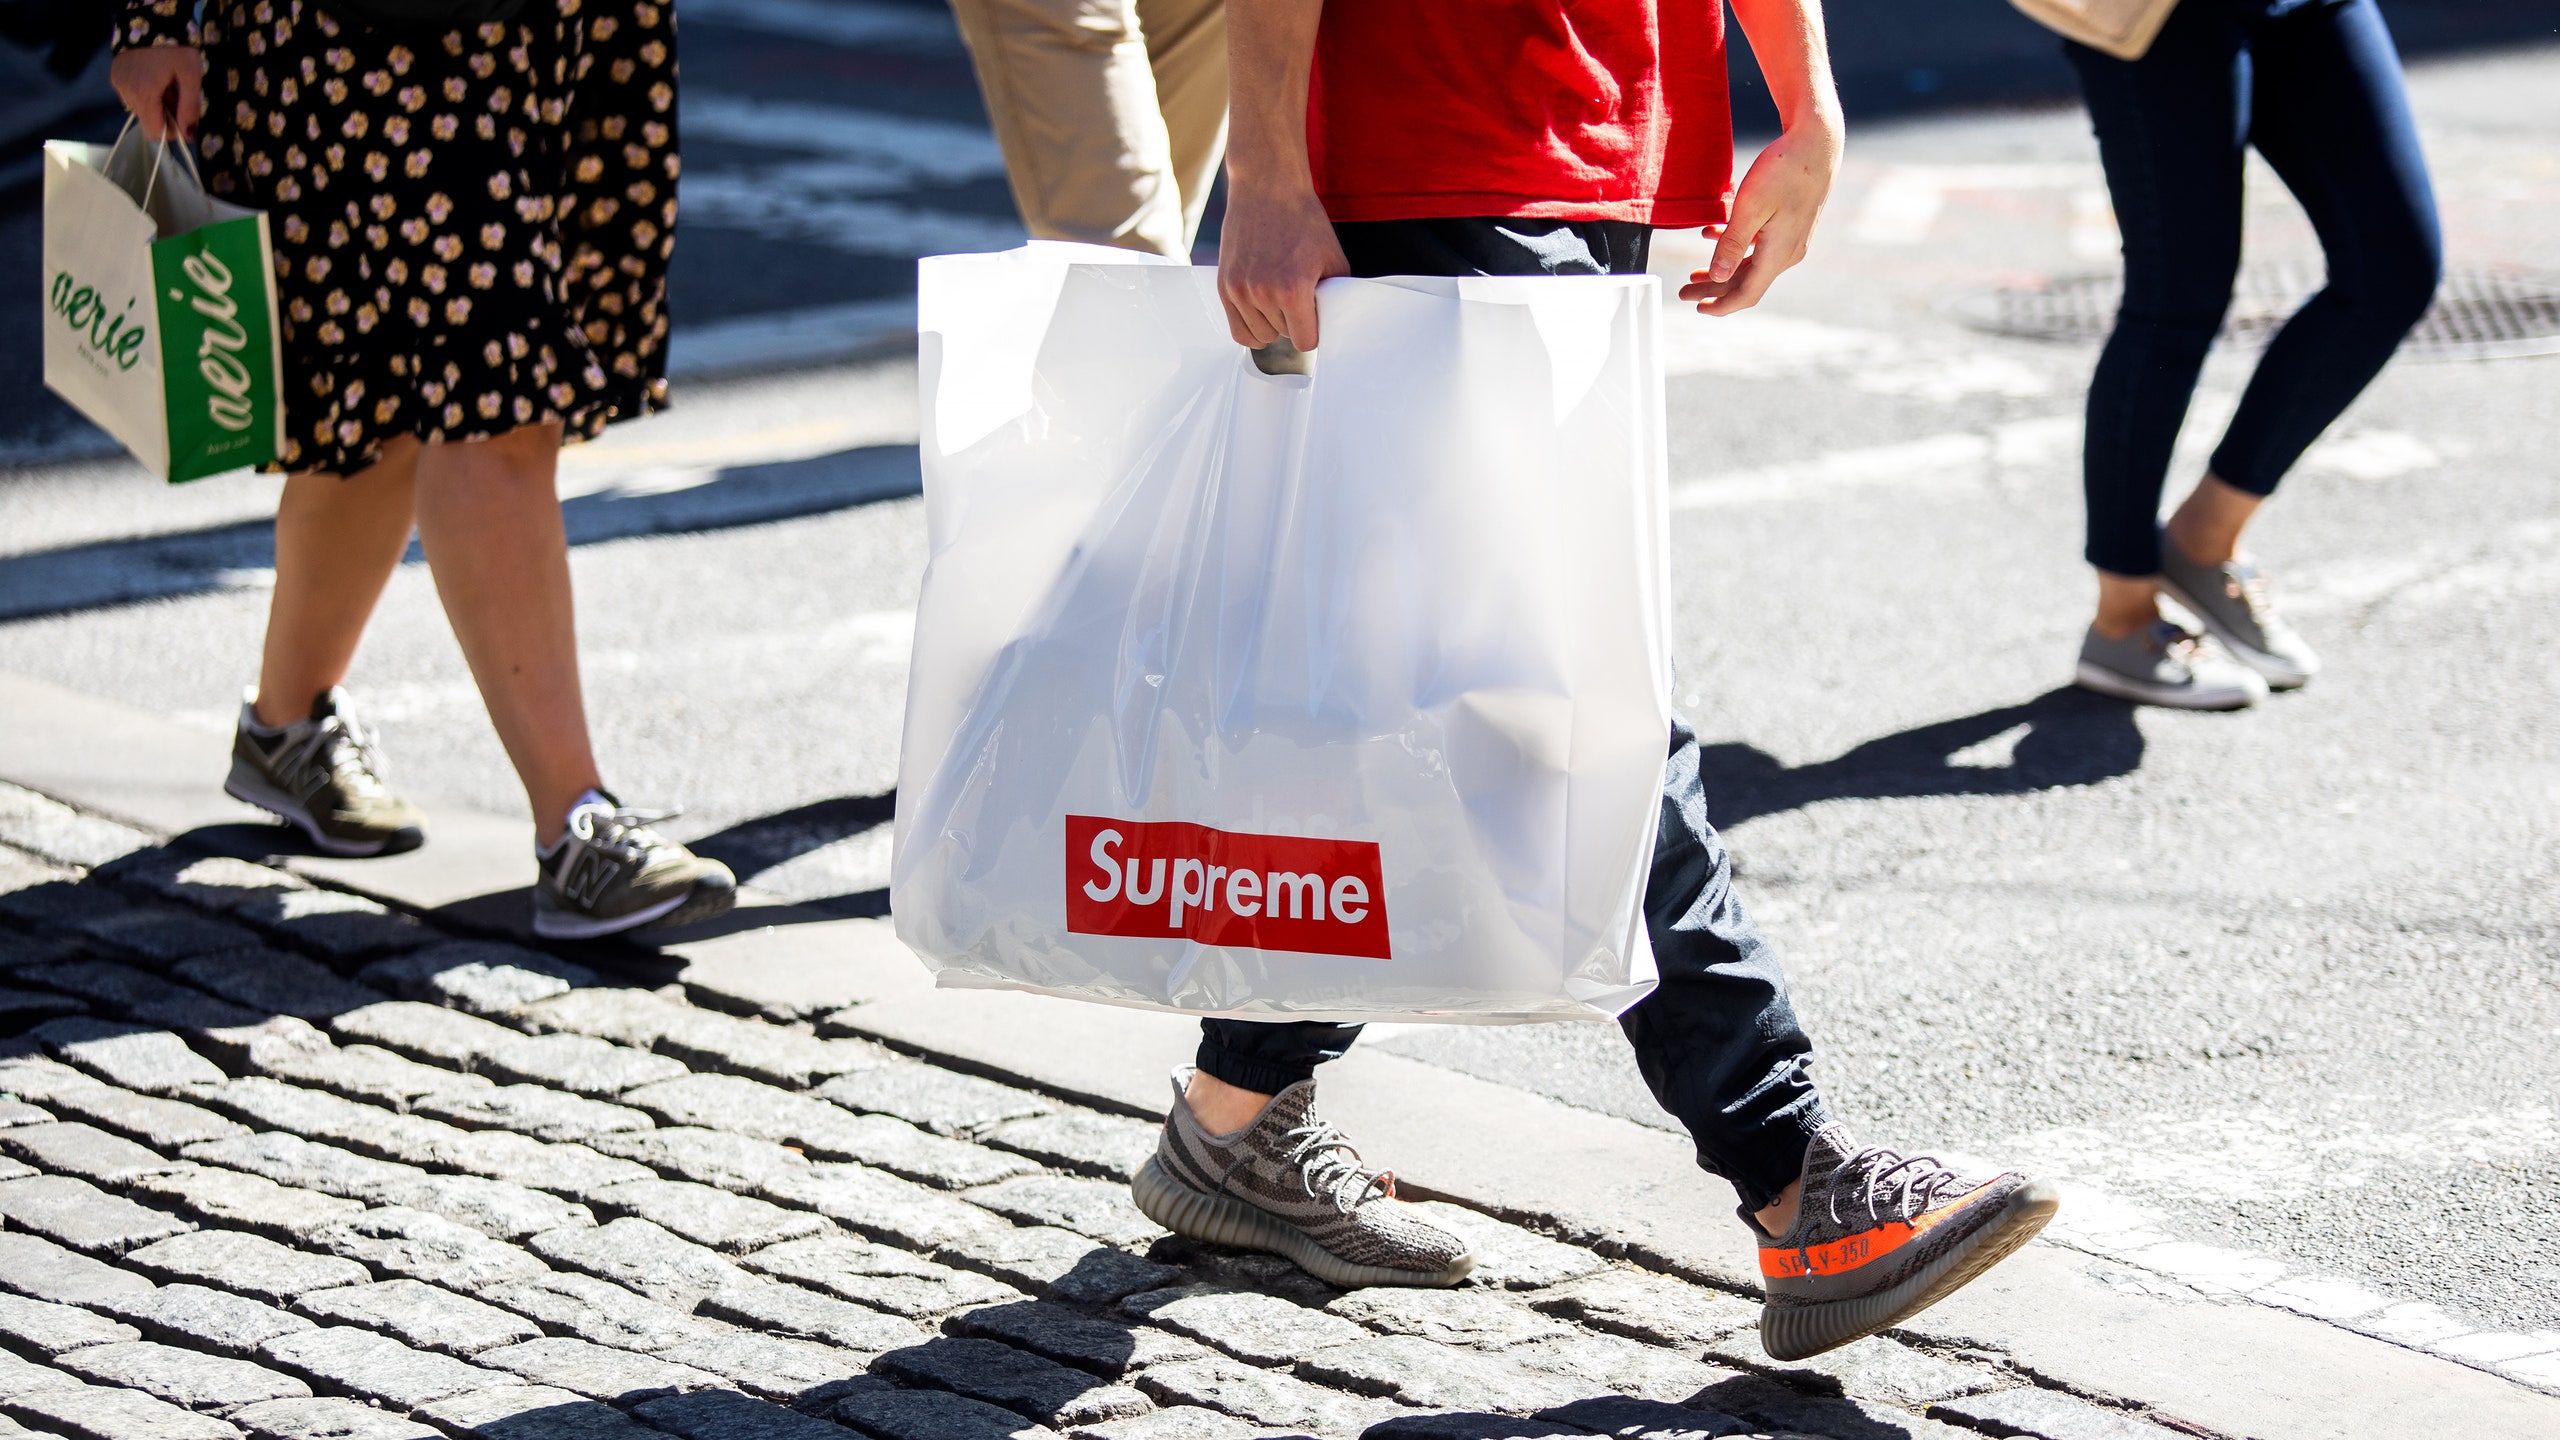 Supreme to Be Acquired by VF Corporation - Fashionista